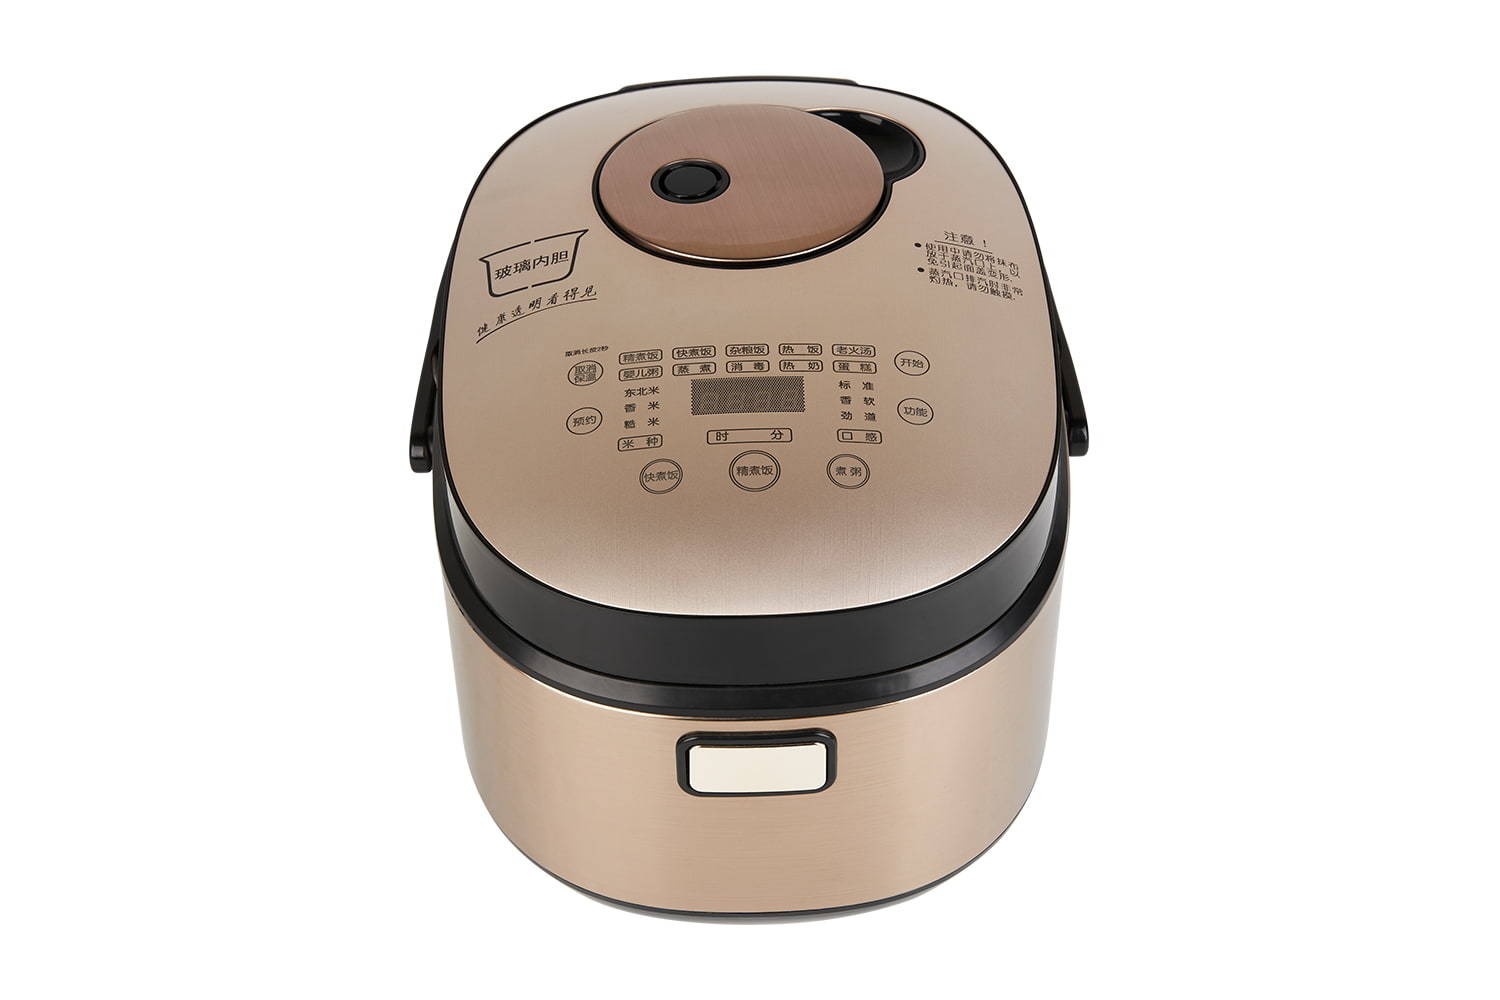 Rice Cooker YYF-36FS01, High temperature resistant glass inner pot, Household multifunction